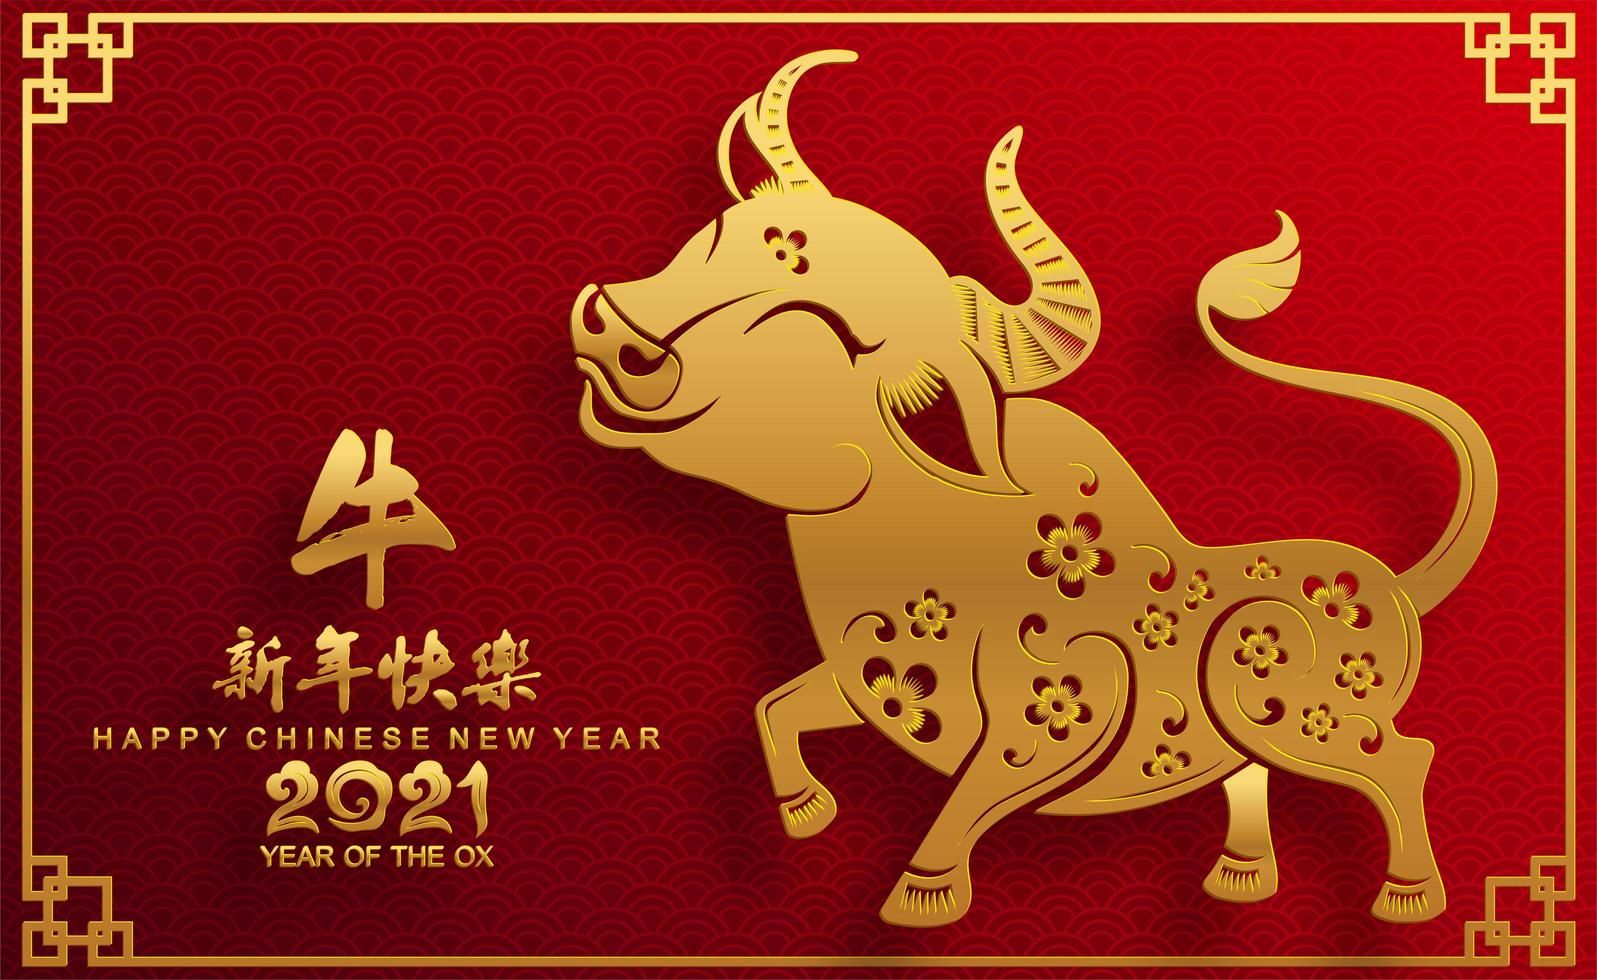 Chinese New Year Greetings 2021 Ox